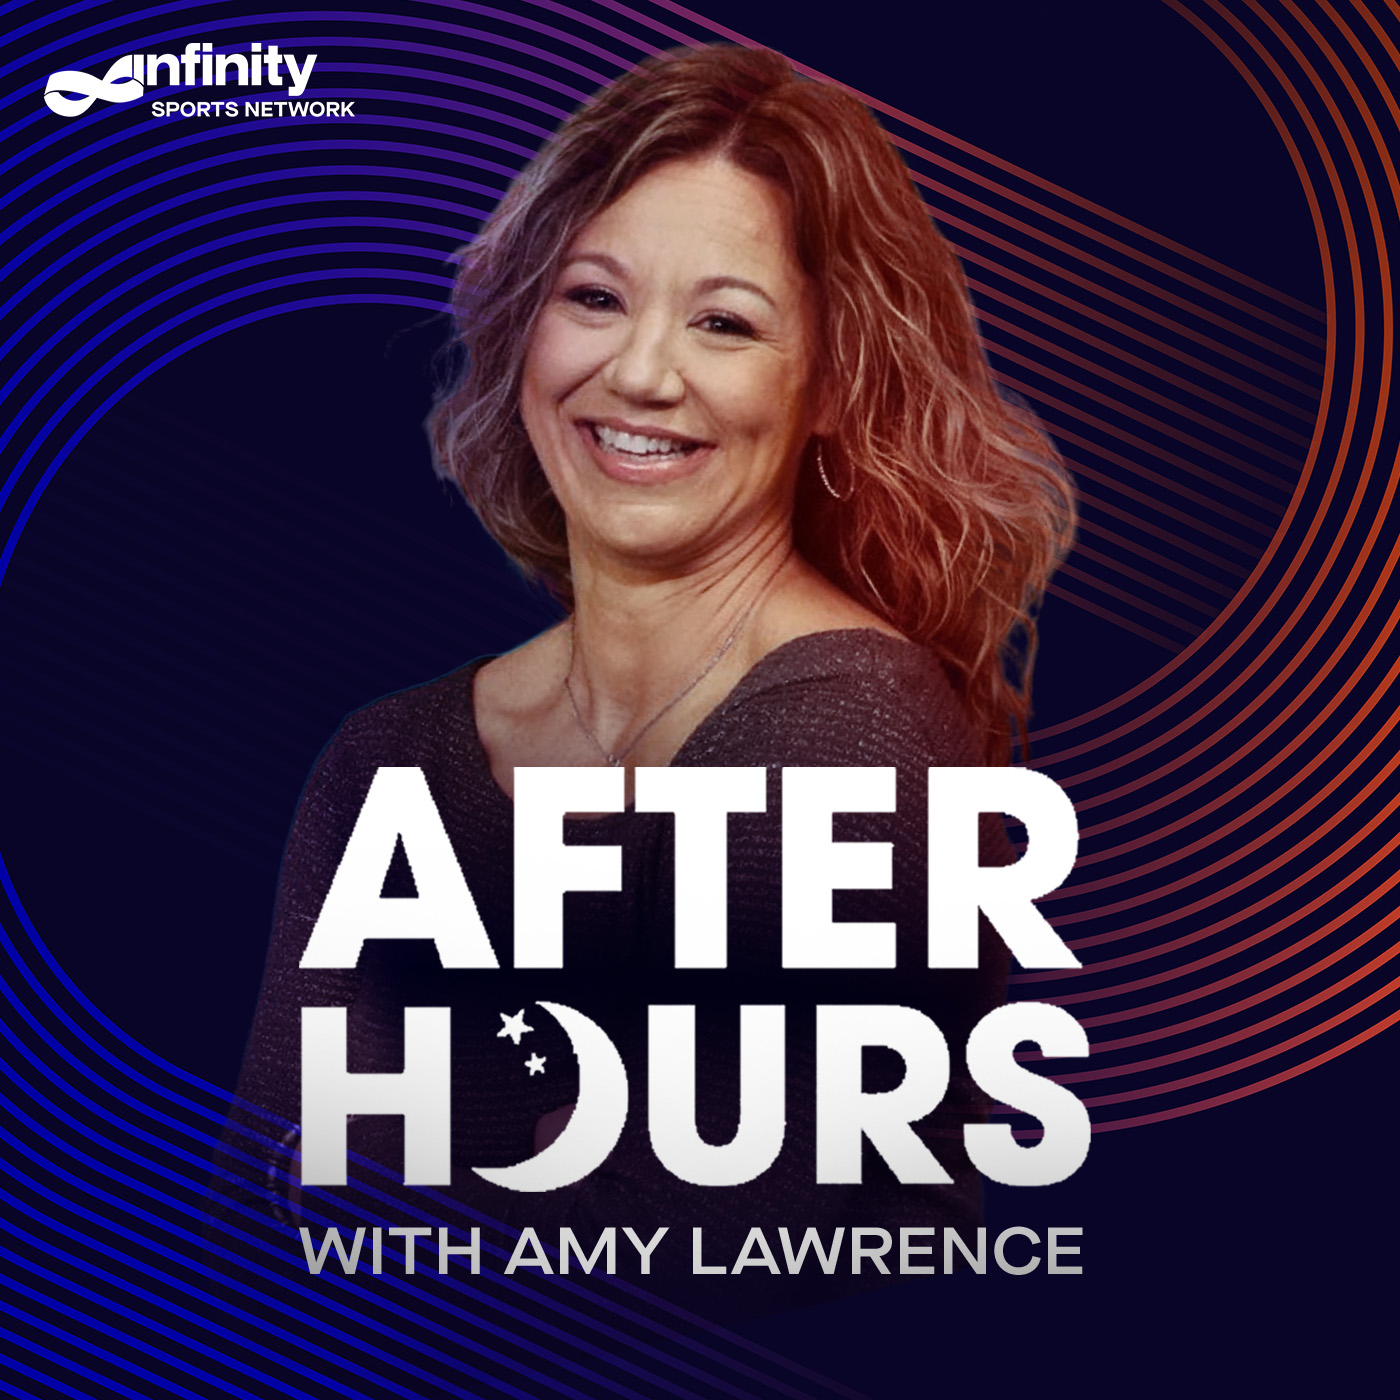 7/12/21 After Hours with Amy Lawrence PODCAST: Hour 4